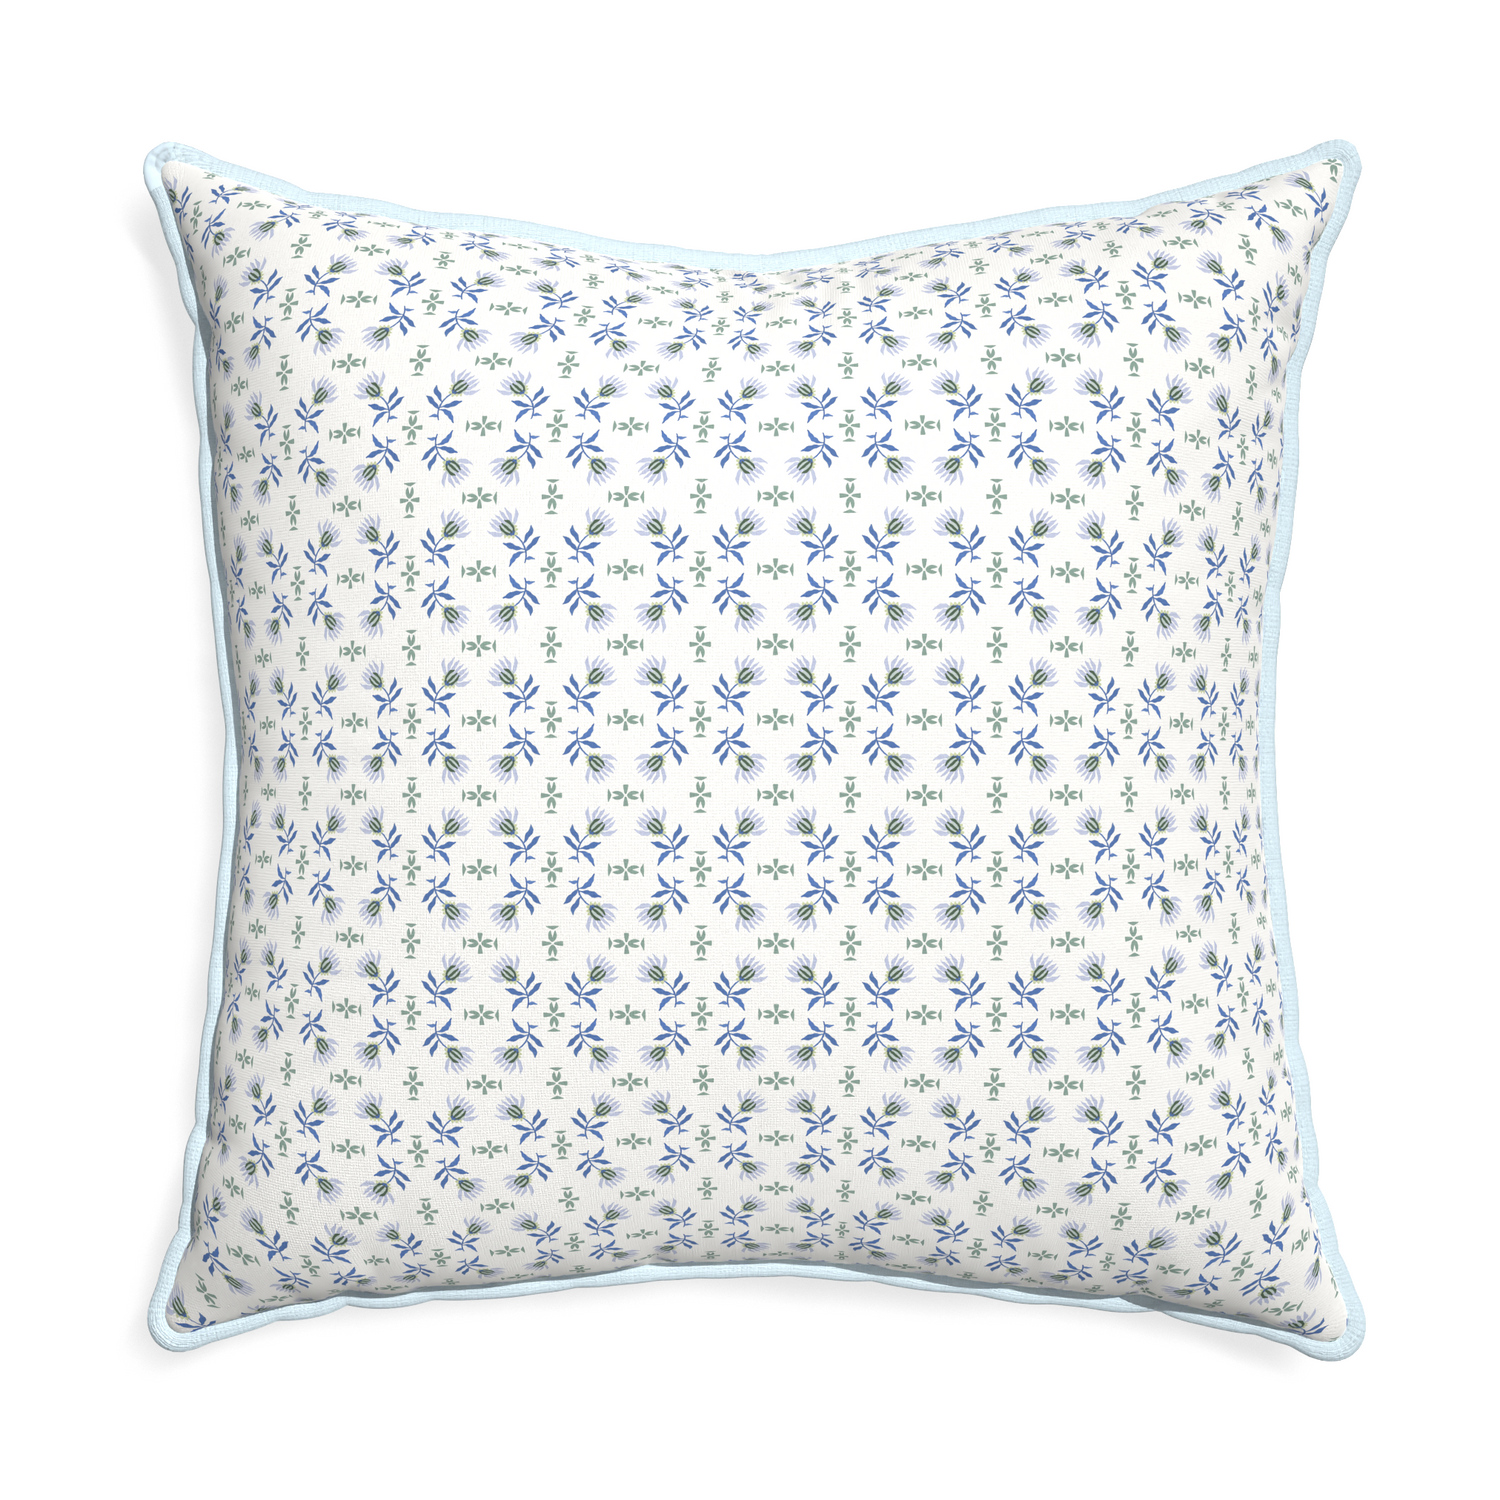 Euro-sham lee custom blue & green floralpillow with powder piping on white background